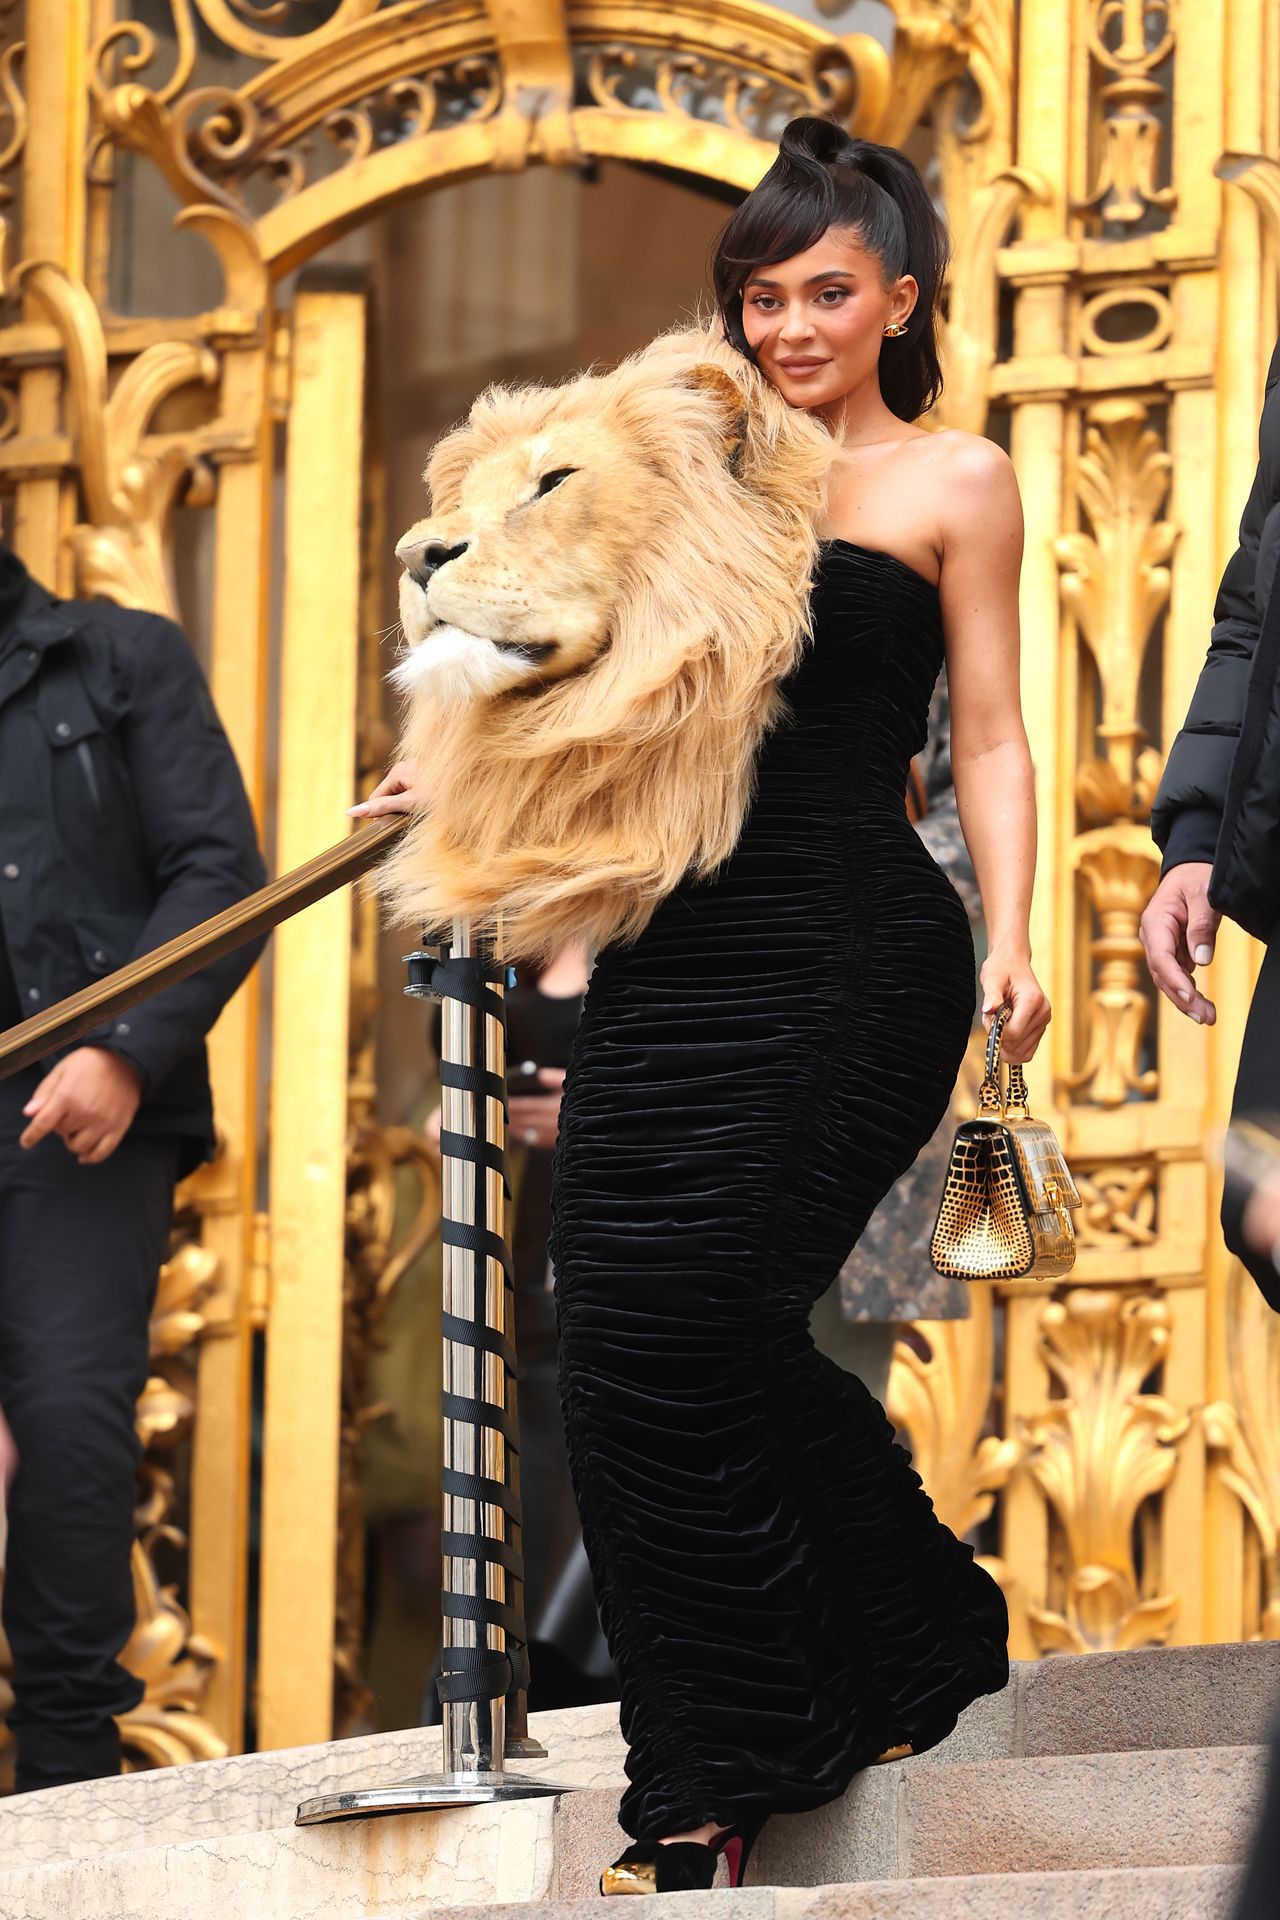 Kylie Jenner in a creation with a lion's head